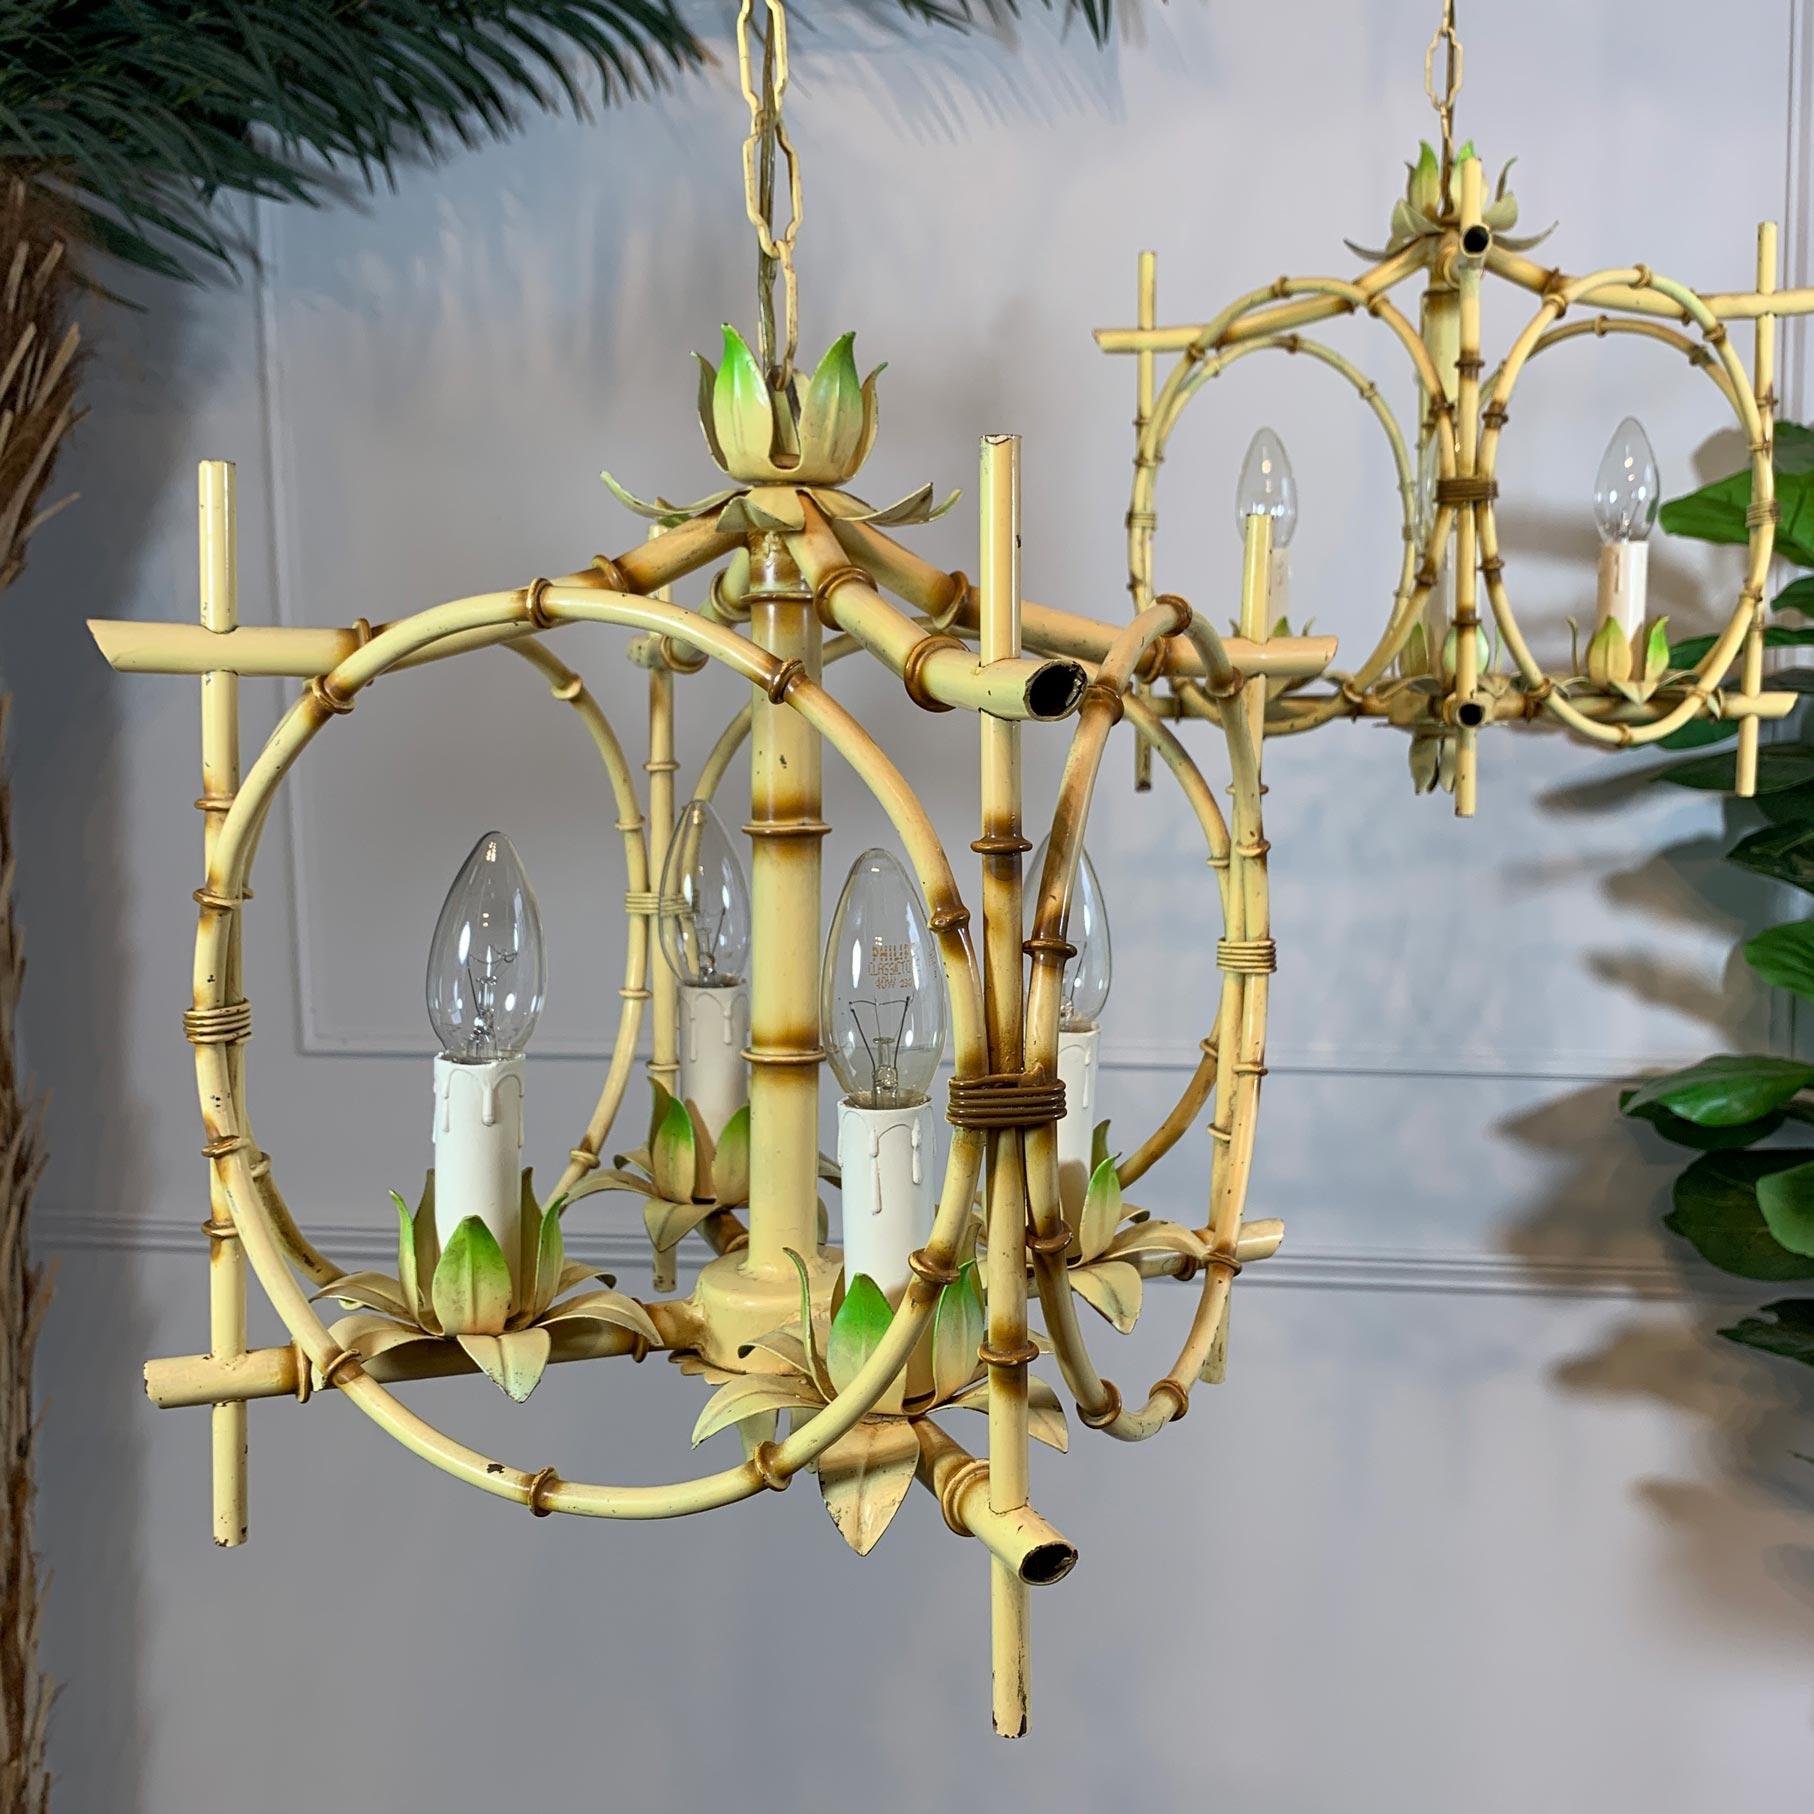 Pair of Faux Bamboo Pagoda Chandeliers Italy 1950's For Sale 5